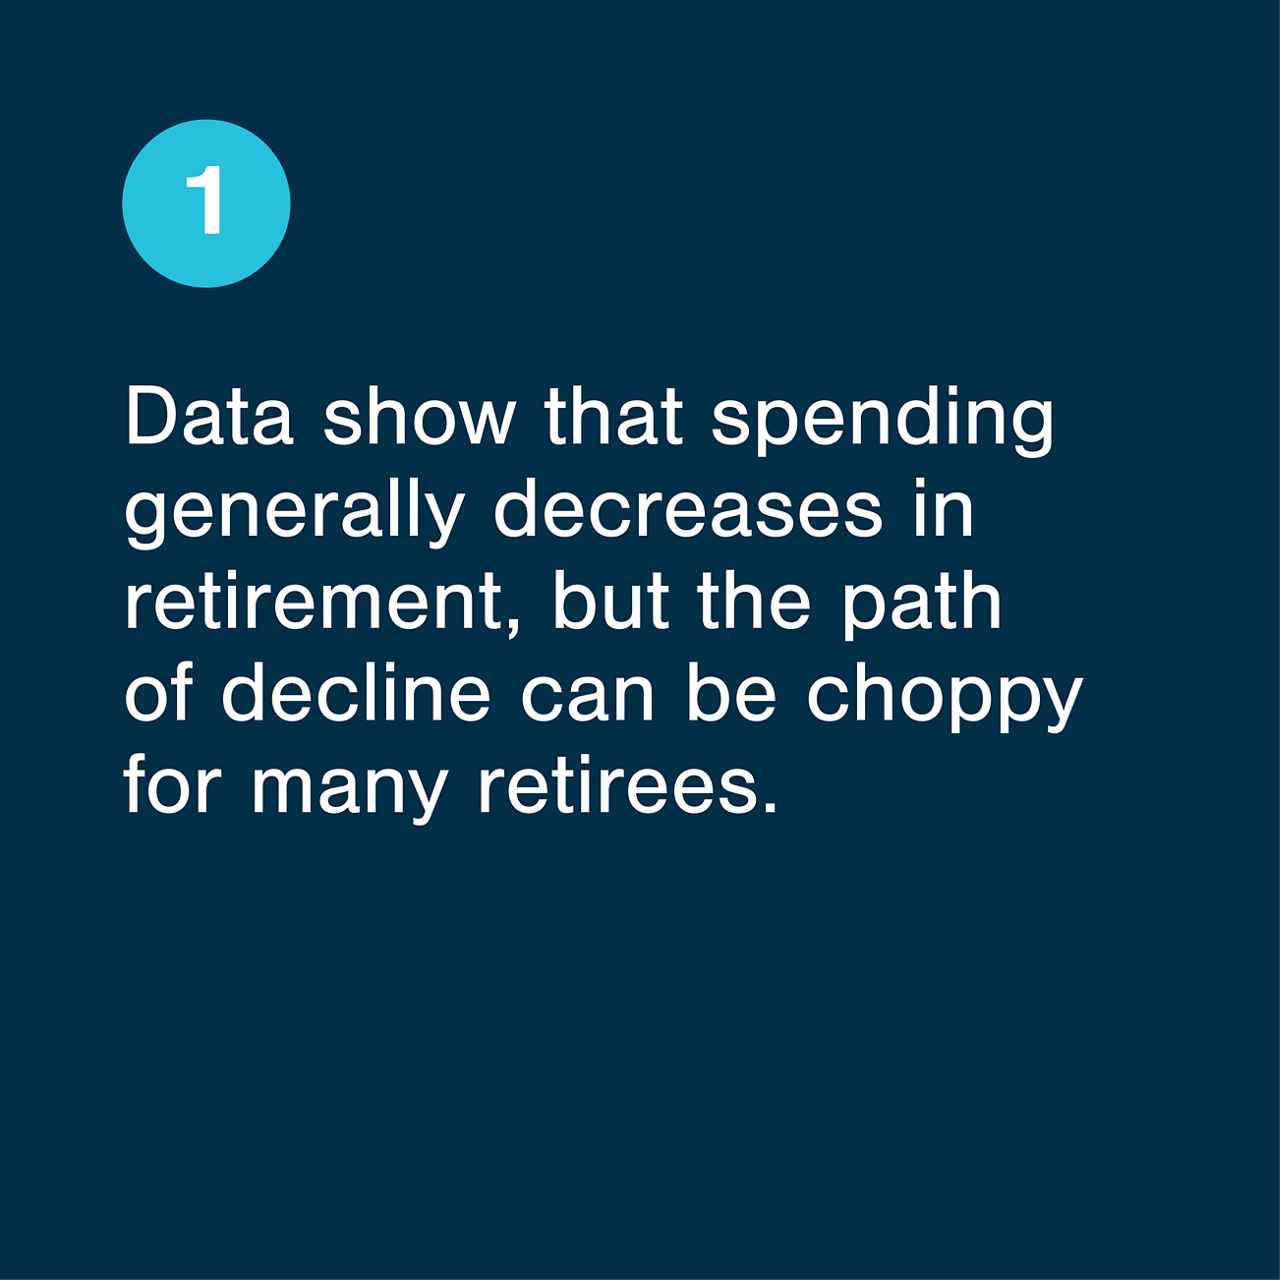 Data show that spending generally decreases in retirement, but the path of decline can be choppy for many retirees.